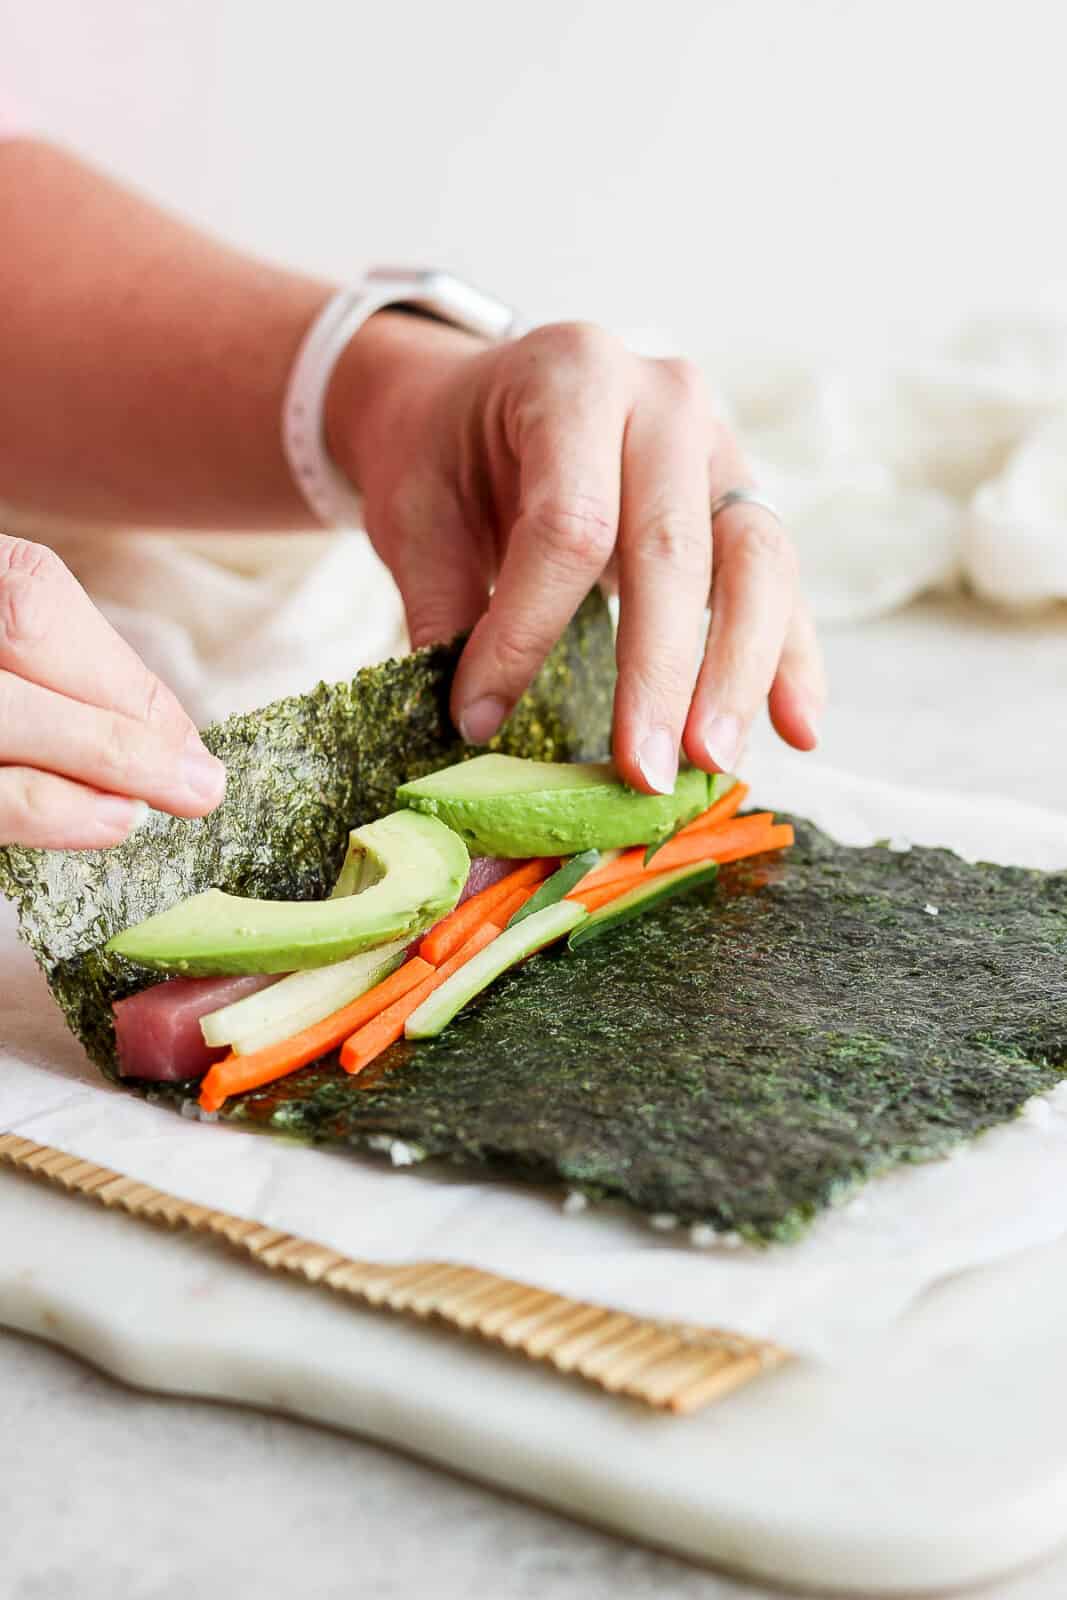 Two hands lifting the end of the nori sheet over the filling.